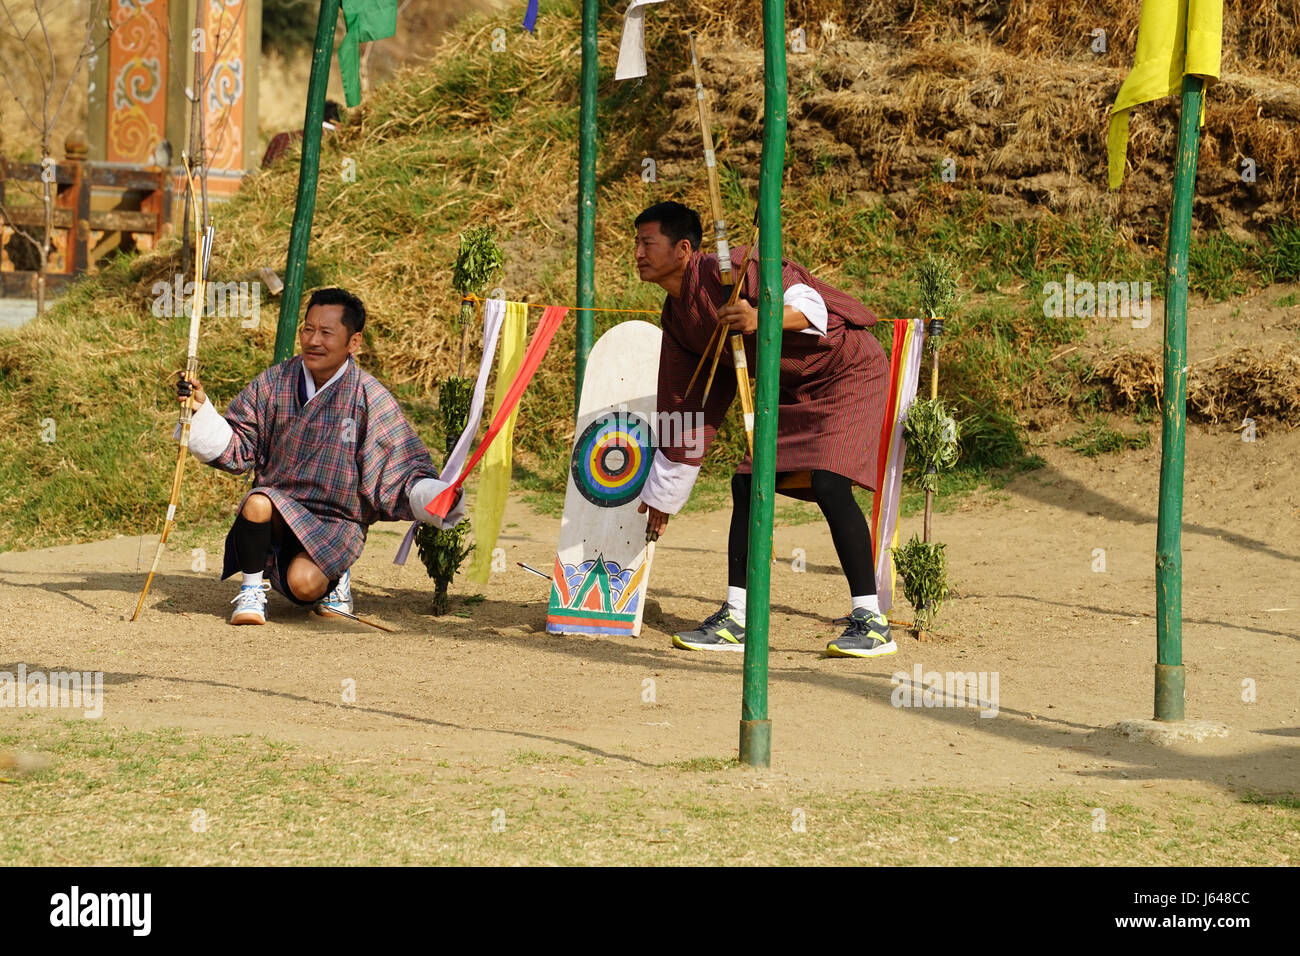 Men in traditional clothing showing hit on target at bow an arrow shooting in Thimphu, Bhutan Stock Photo